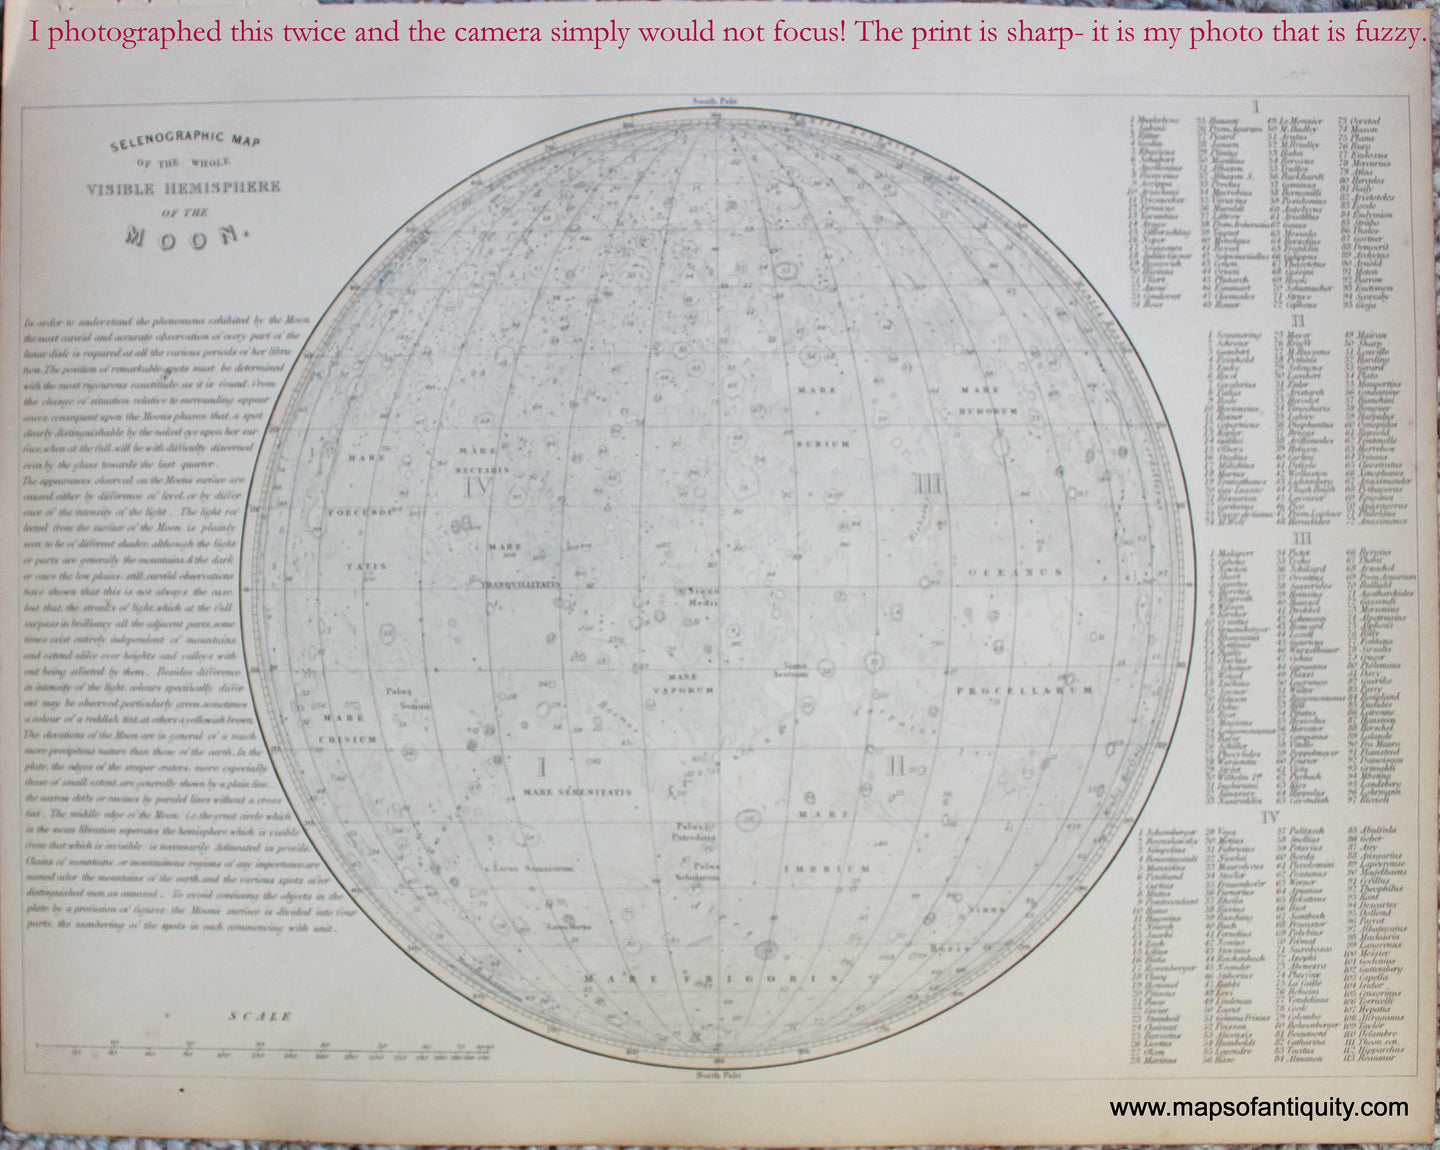 Genuine-Antique-Map-Selenographic-Map-of-the-Whole-Visible-Hemisphere-of-the-Moon-Celestial--1850-Petermann-/-Orr-/-Dower-Maps-Of-Antiquity-1800s-19th-century